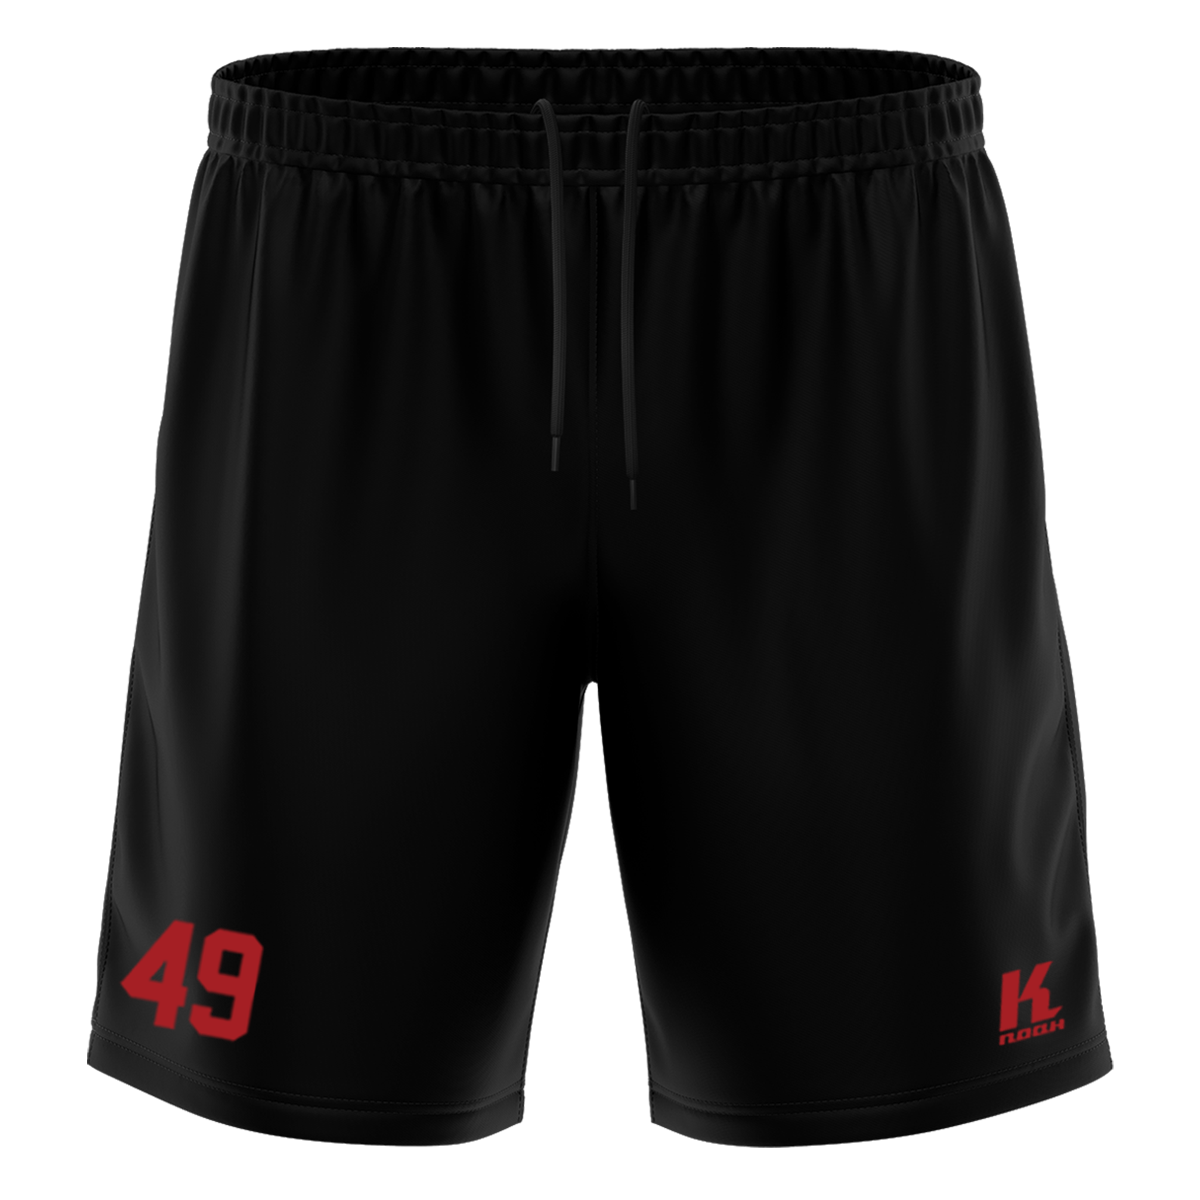 Silverbacks Training Short with Playernumber or Initials